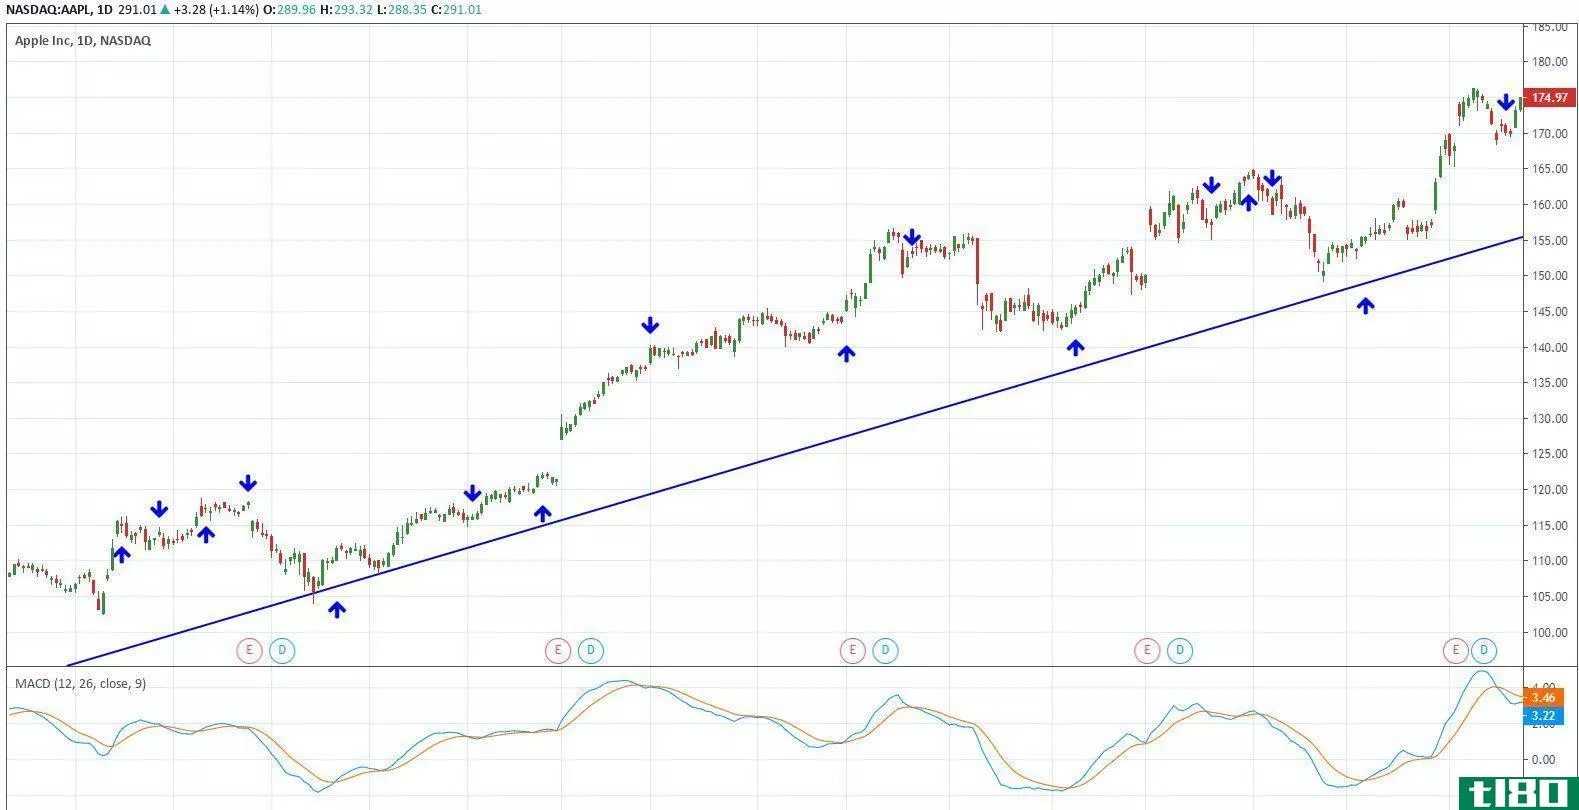 AAPL trade signals during uptrend based on MACD trigger line